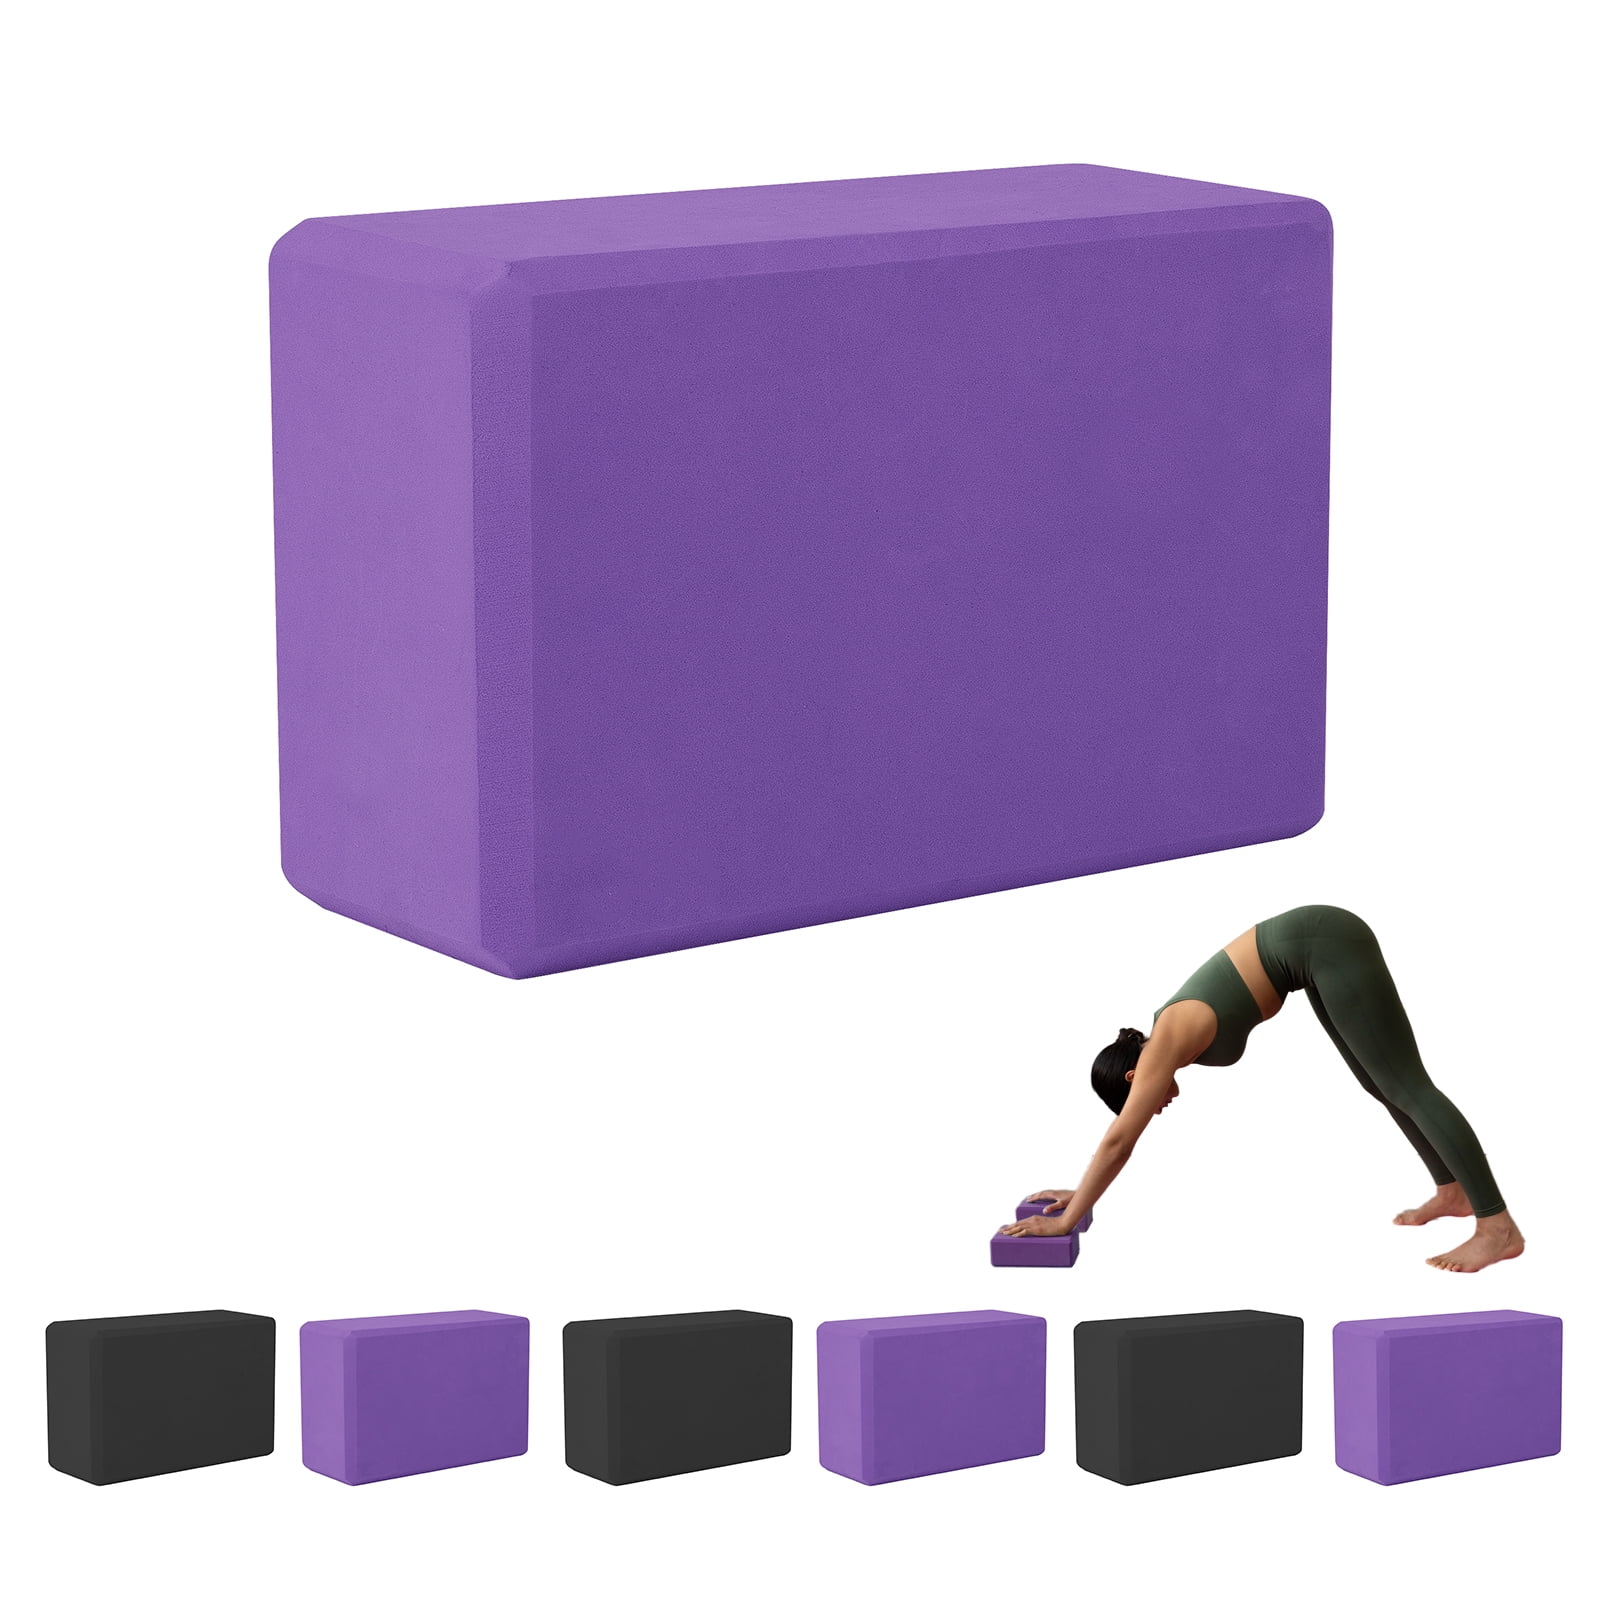 Manduka Recycled High Density EVA Foam Yoga Block – Contoured Edges for  Comfort, Firm Stability for Balance and Support in Any Yoga Pose